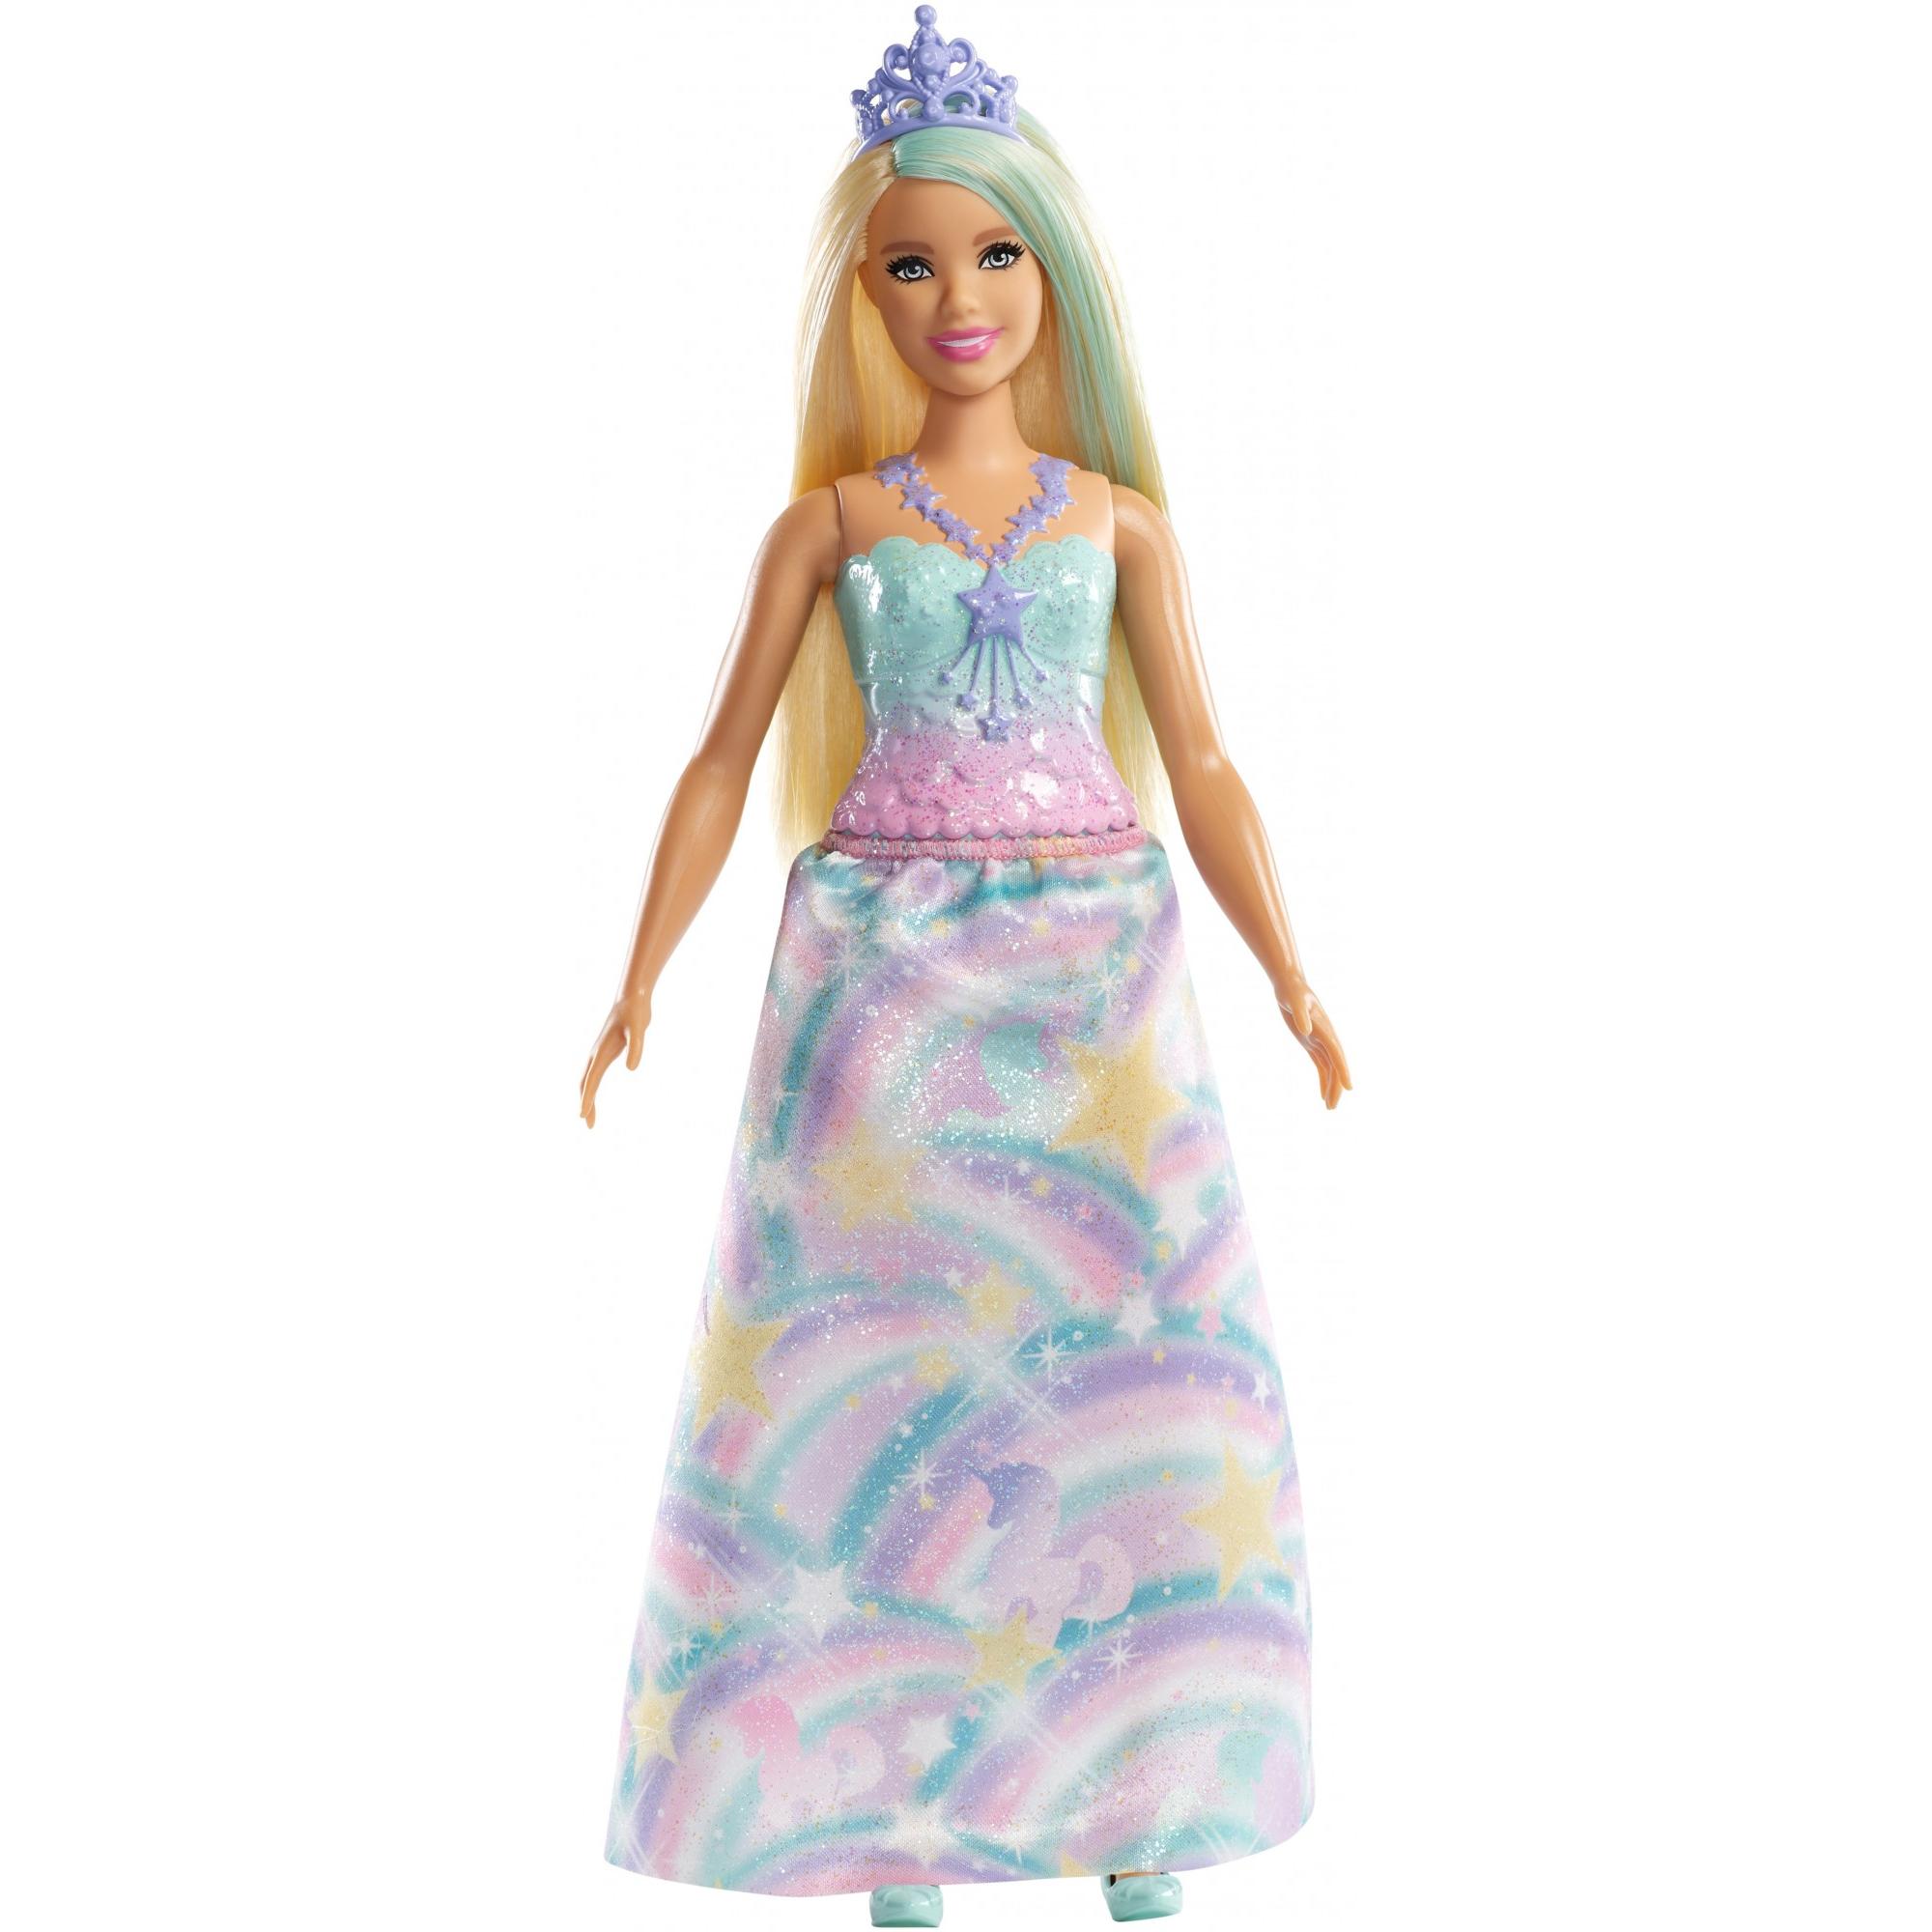 Barbie Dreamtopia Princess Doll, Blonde, Wearing Rainbow-Themed Outfit - image 1 of 7